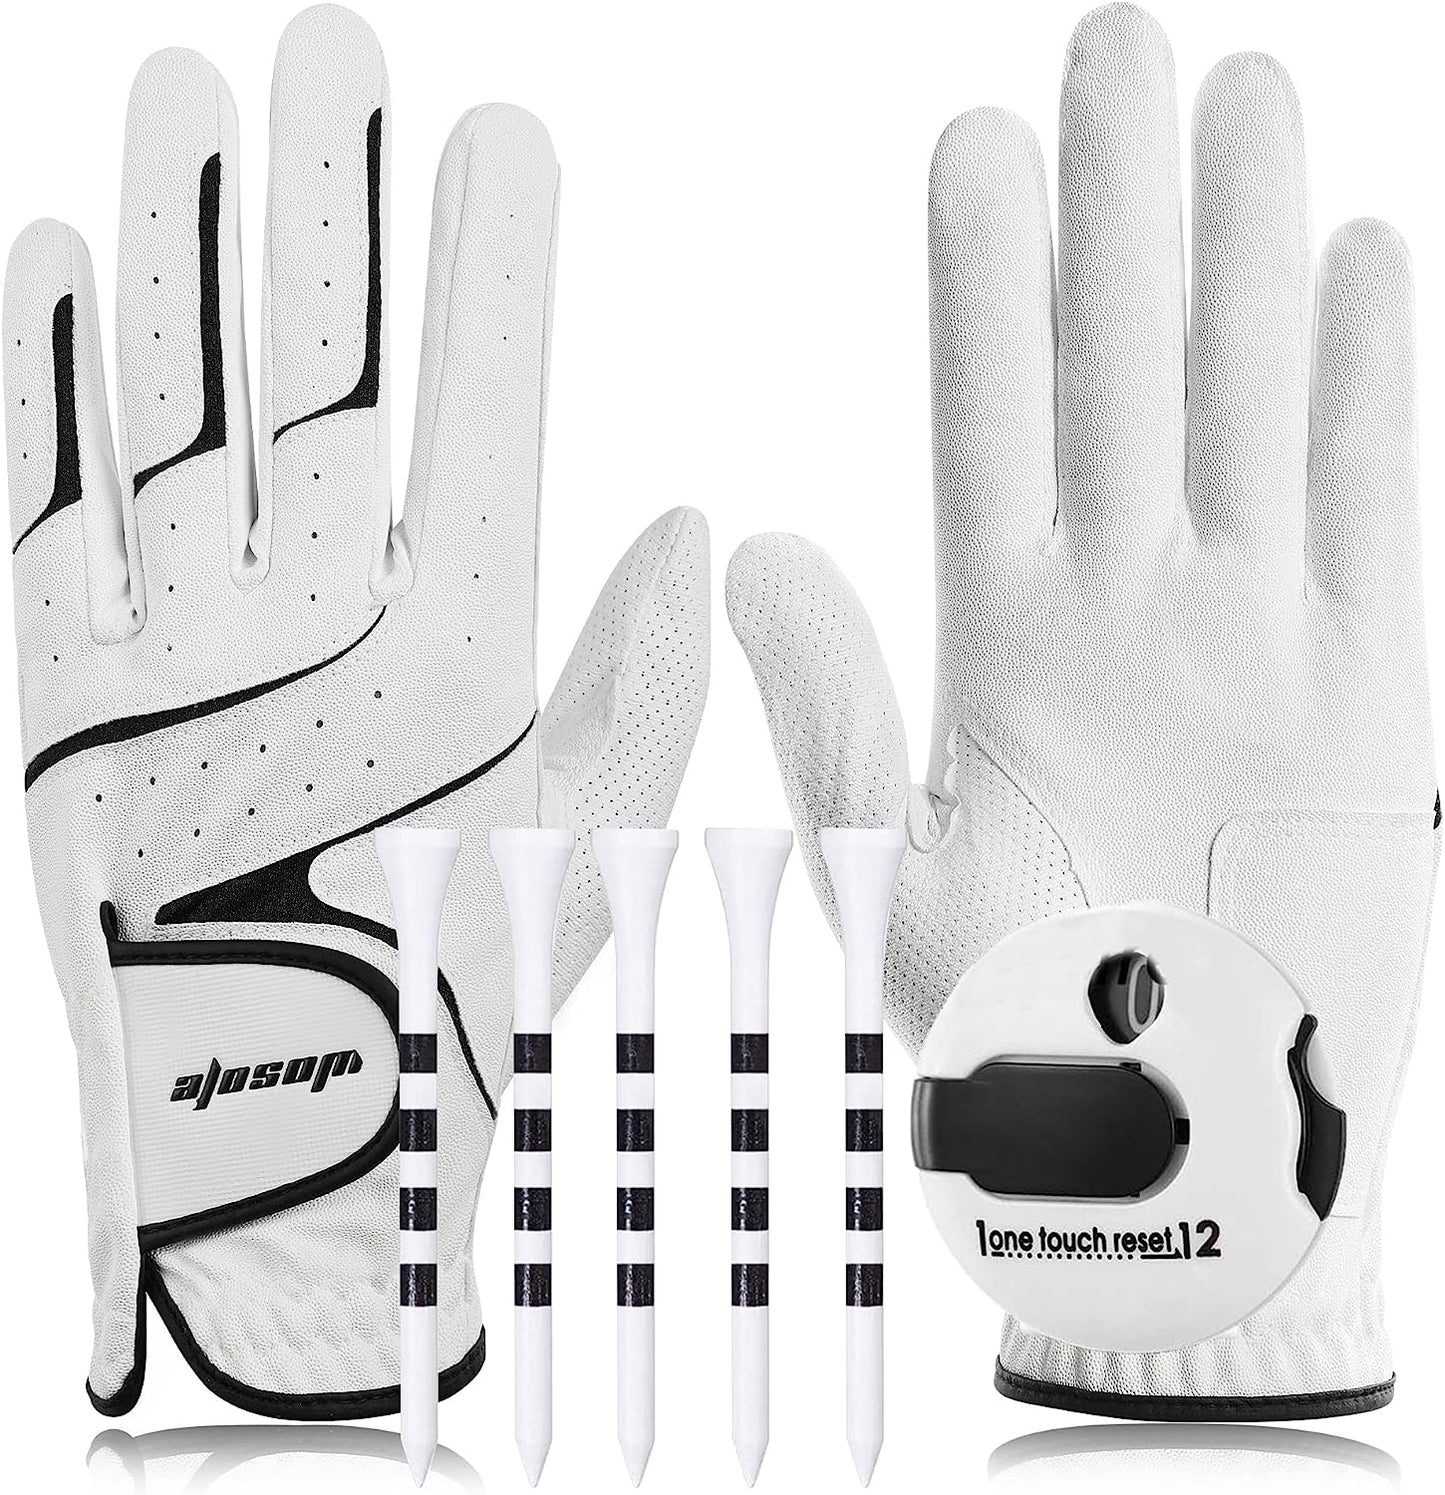 wosofe Golf Glove Left Hand Men‘ PU Transparent Non-Slip Nanocloth Lycra Accessories No Sweat Comfortable All Weather with Scorer and Tee